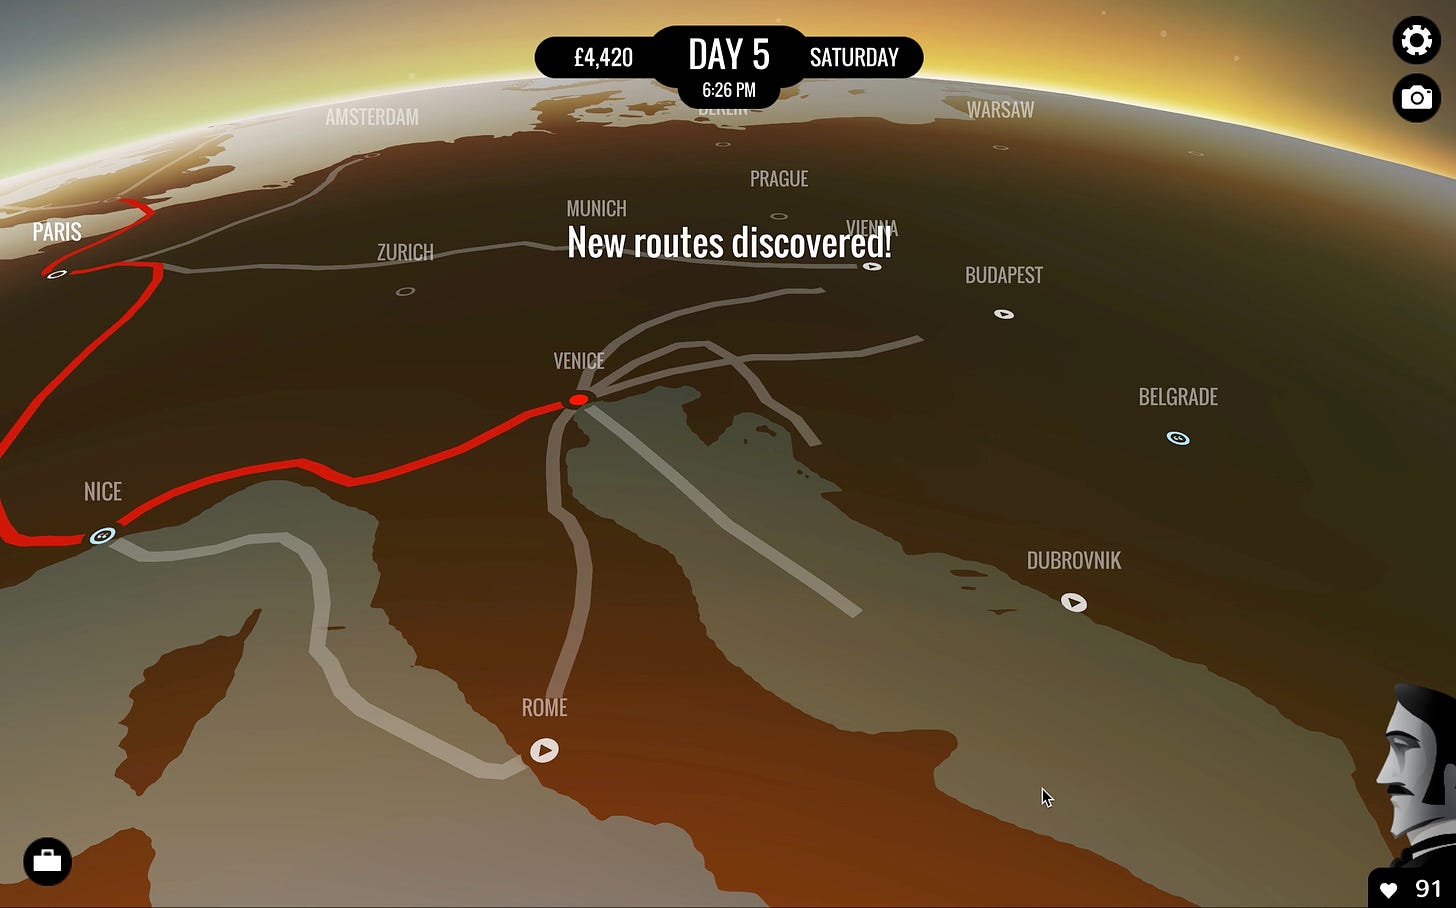 Screenshot from 80 Days, showing the text "New routes discovered!" over a map of the region near Italy.